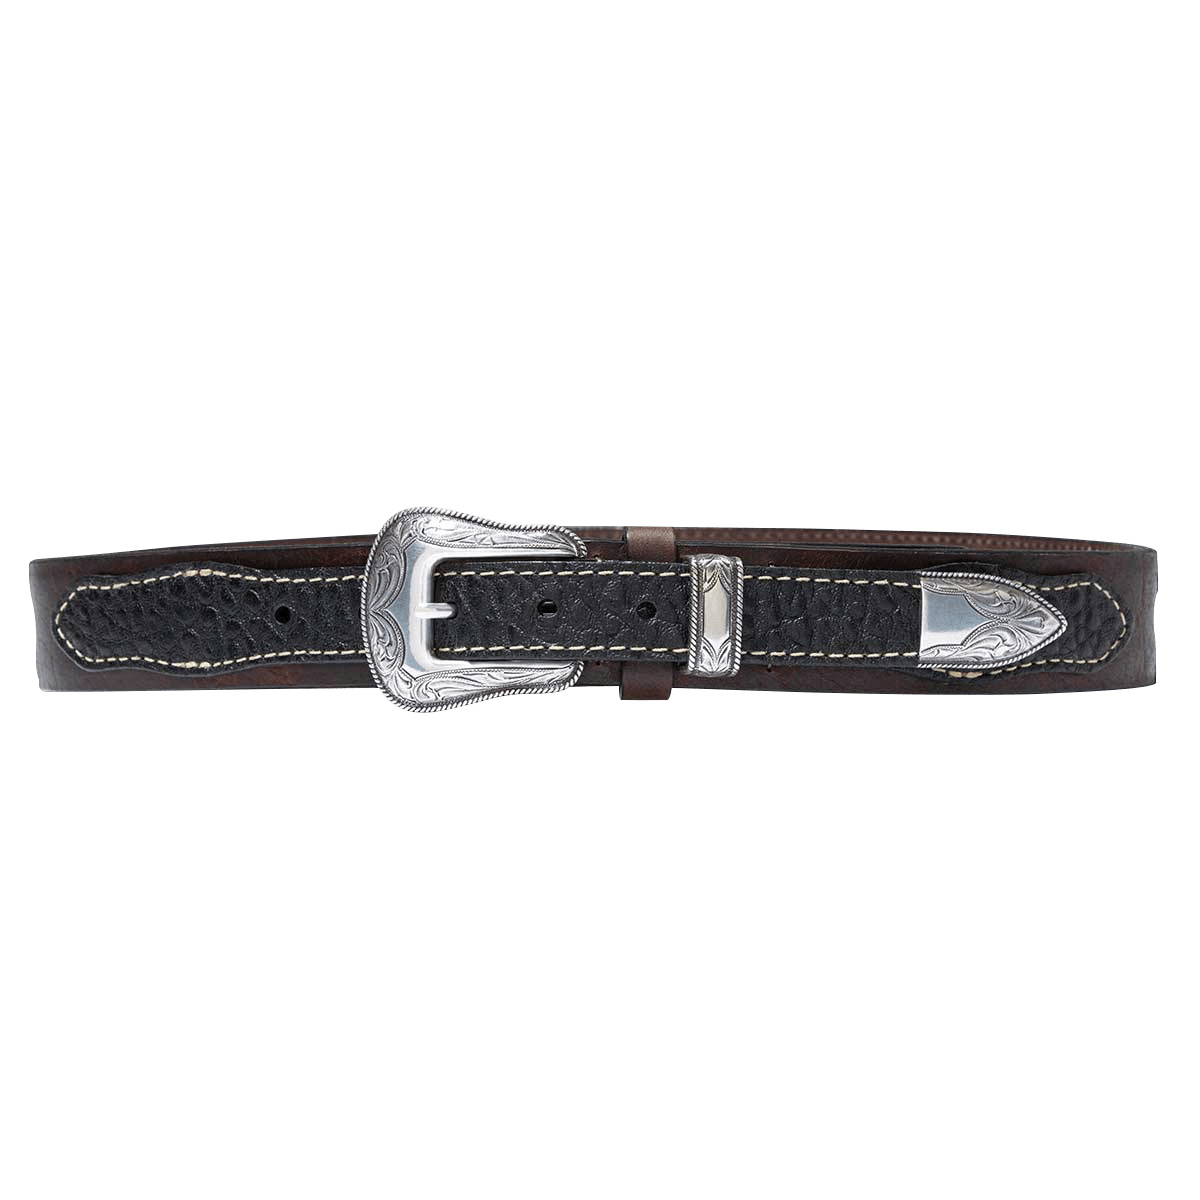 Western Leather Ranger Belt - Made in the USA